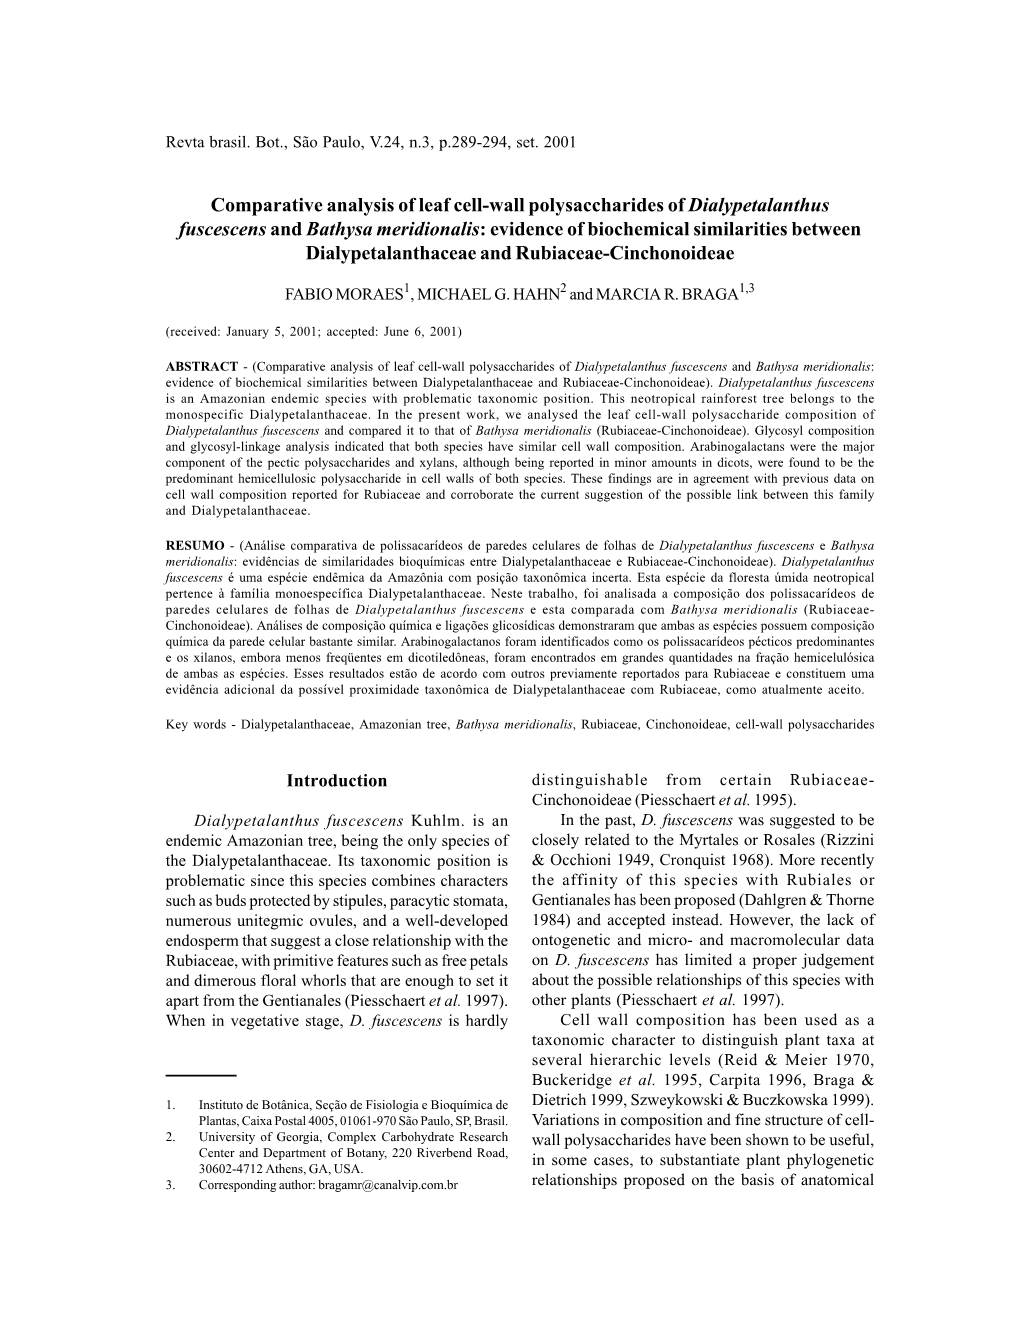 Comparative Analysis of Leaf Cell-Wall Polysaccharides Of